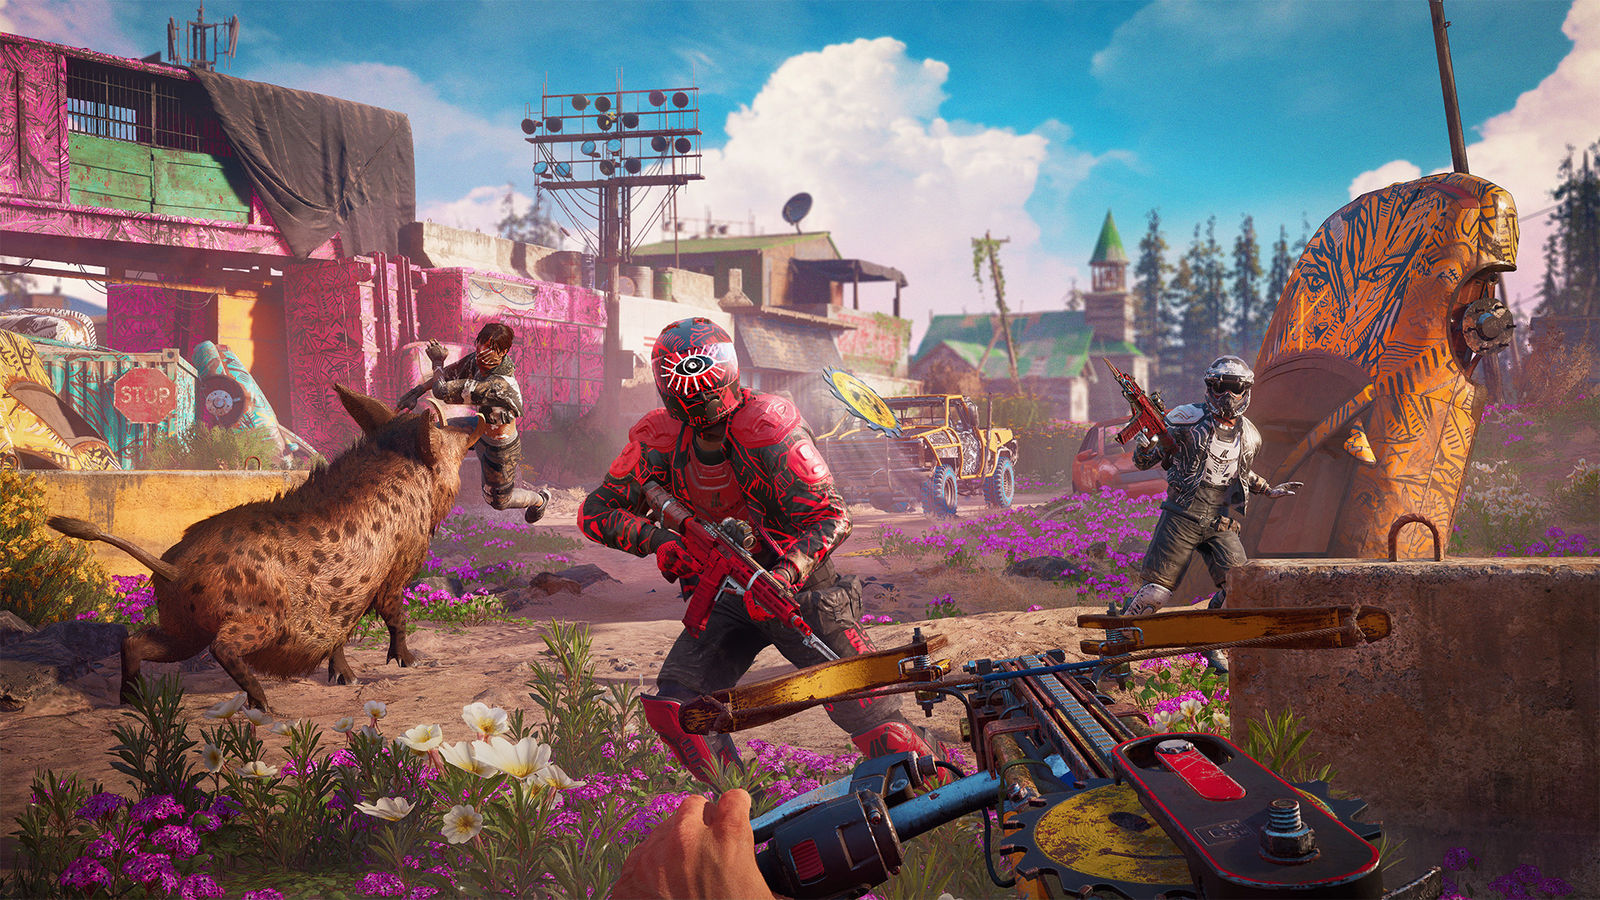 z Far Cry New Dawn Deluxe Edition (Uplay) RU/CIS